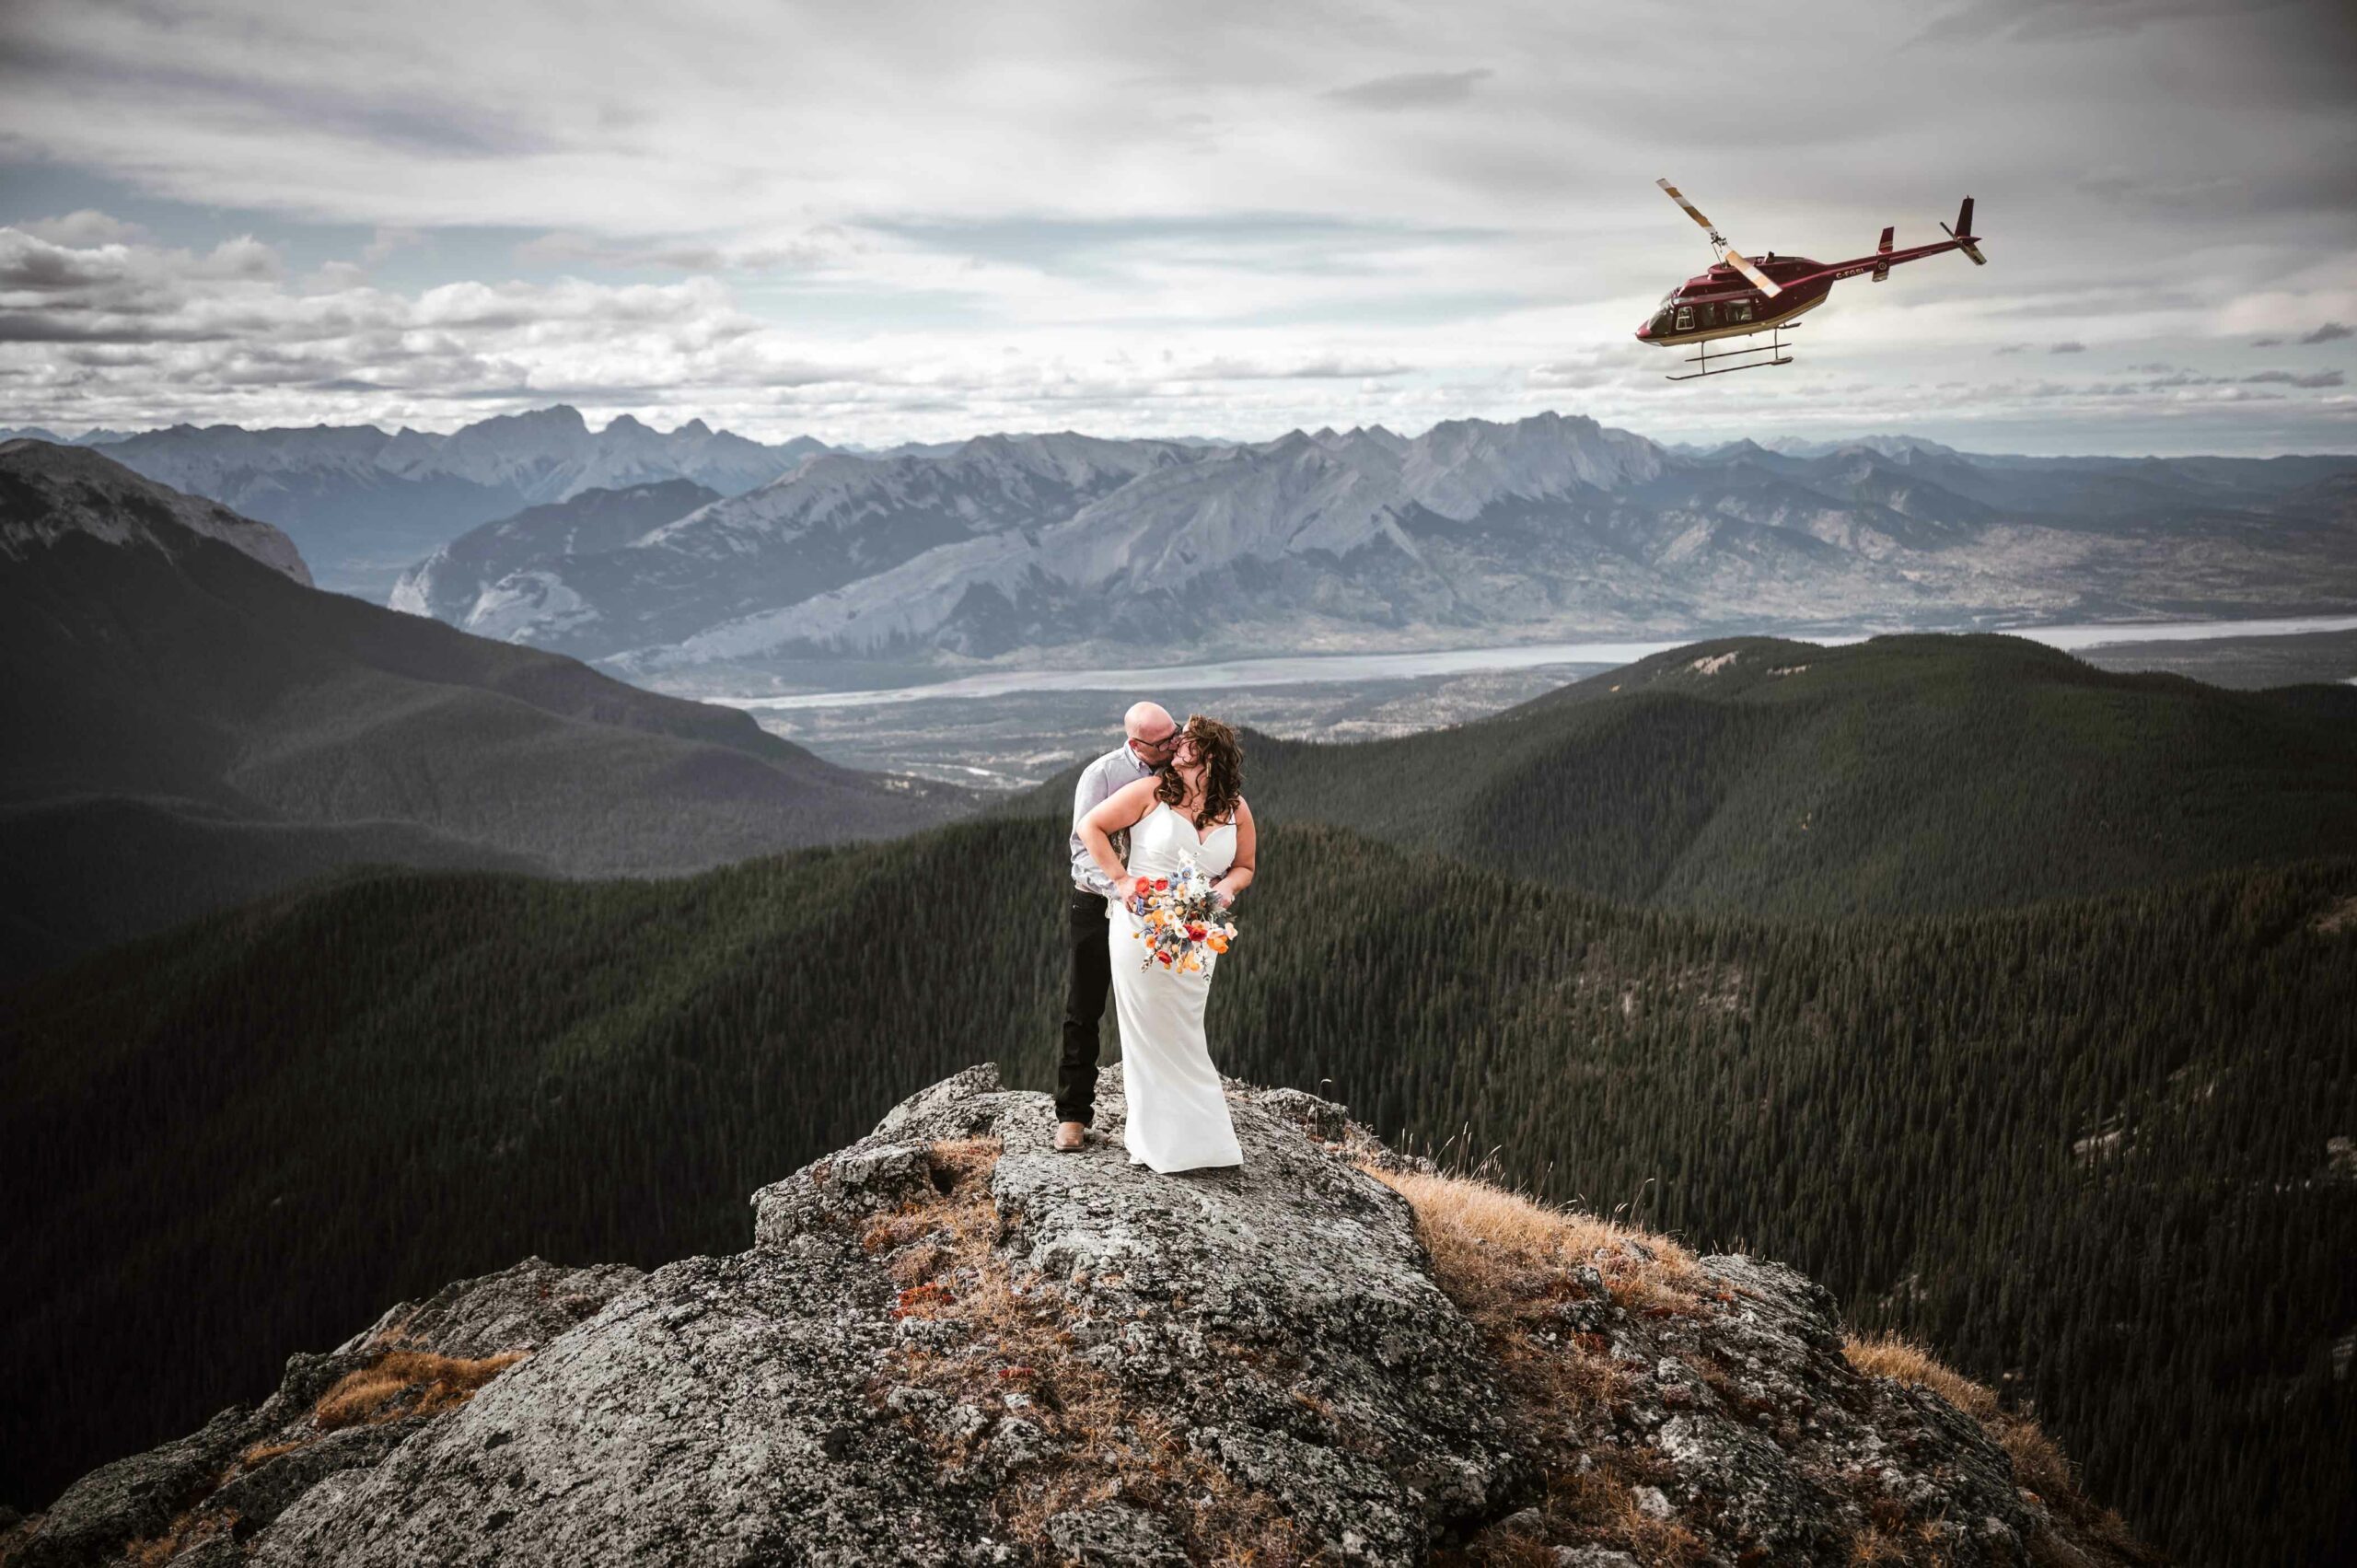 A couple getting married in the backcountry on a mountaintop with a helicopter in the background